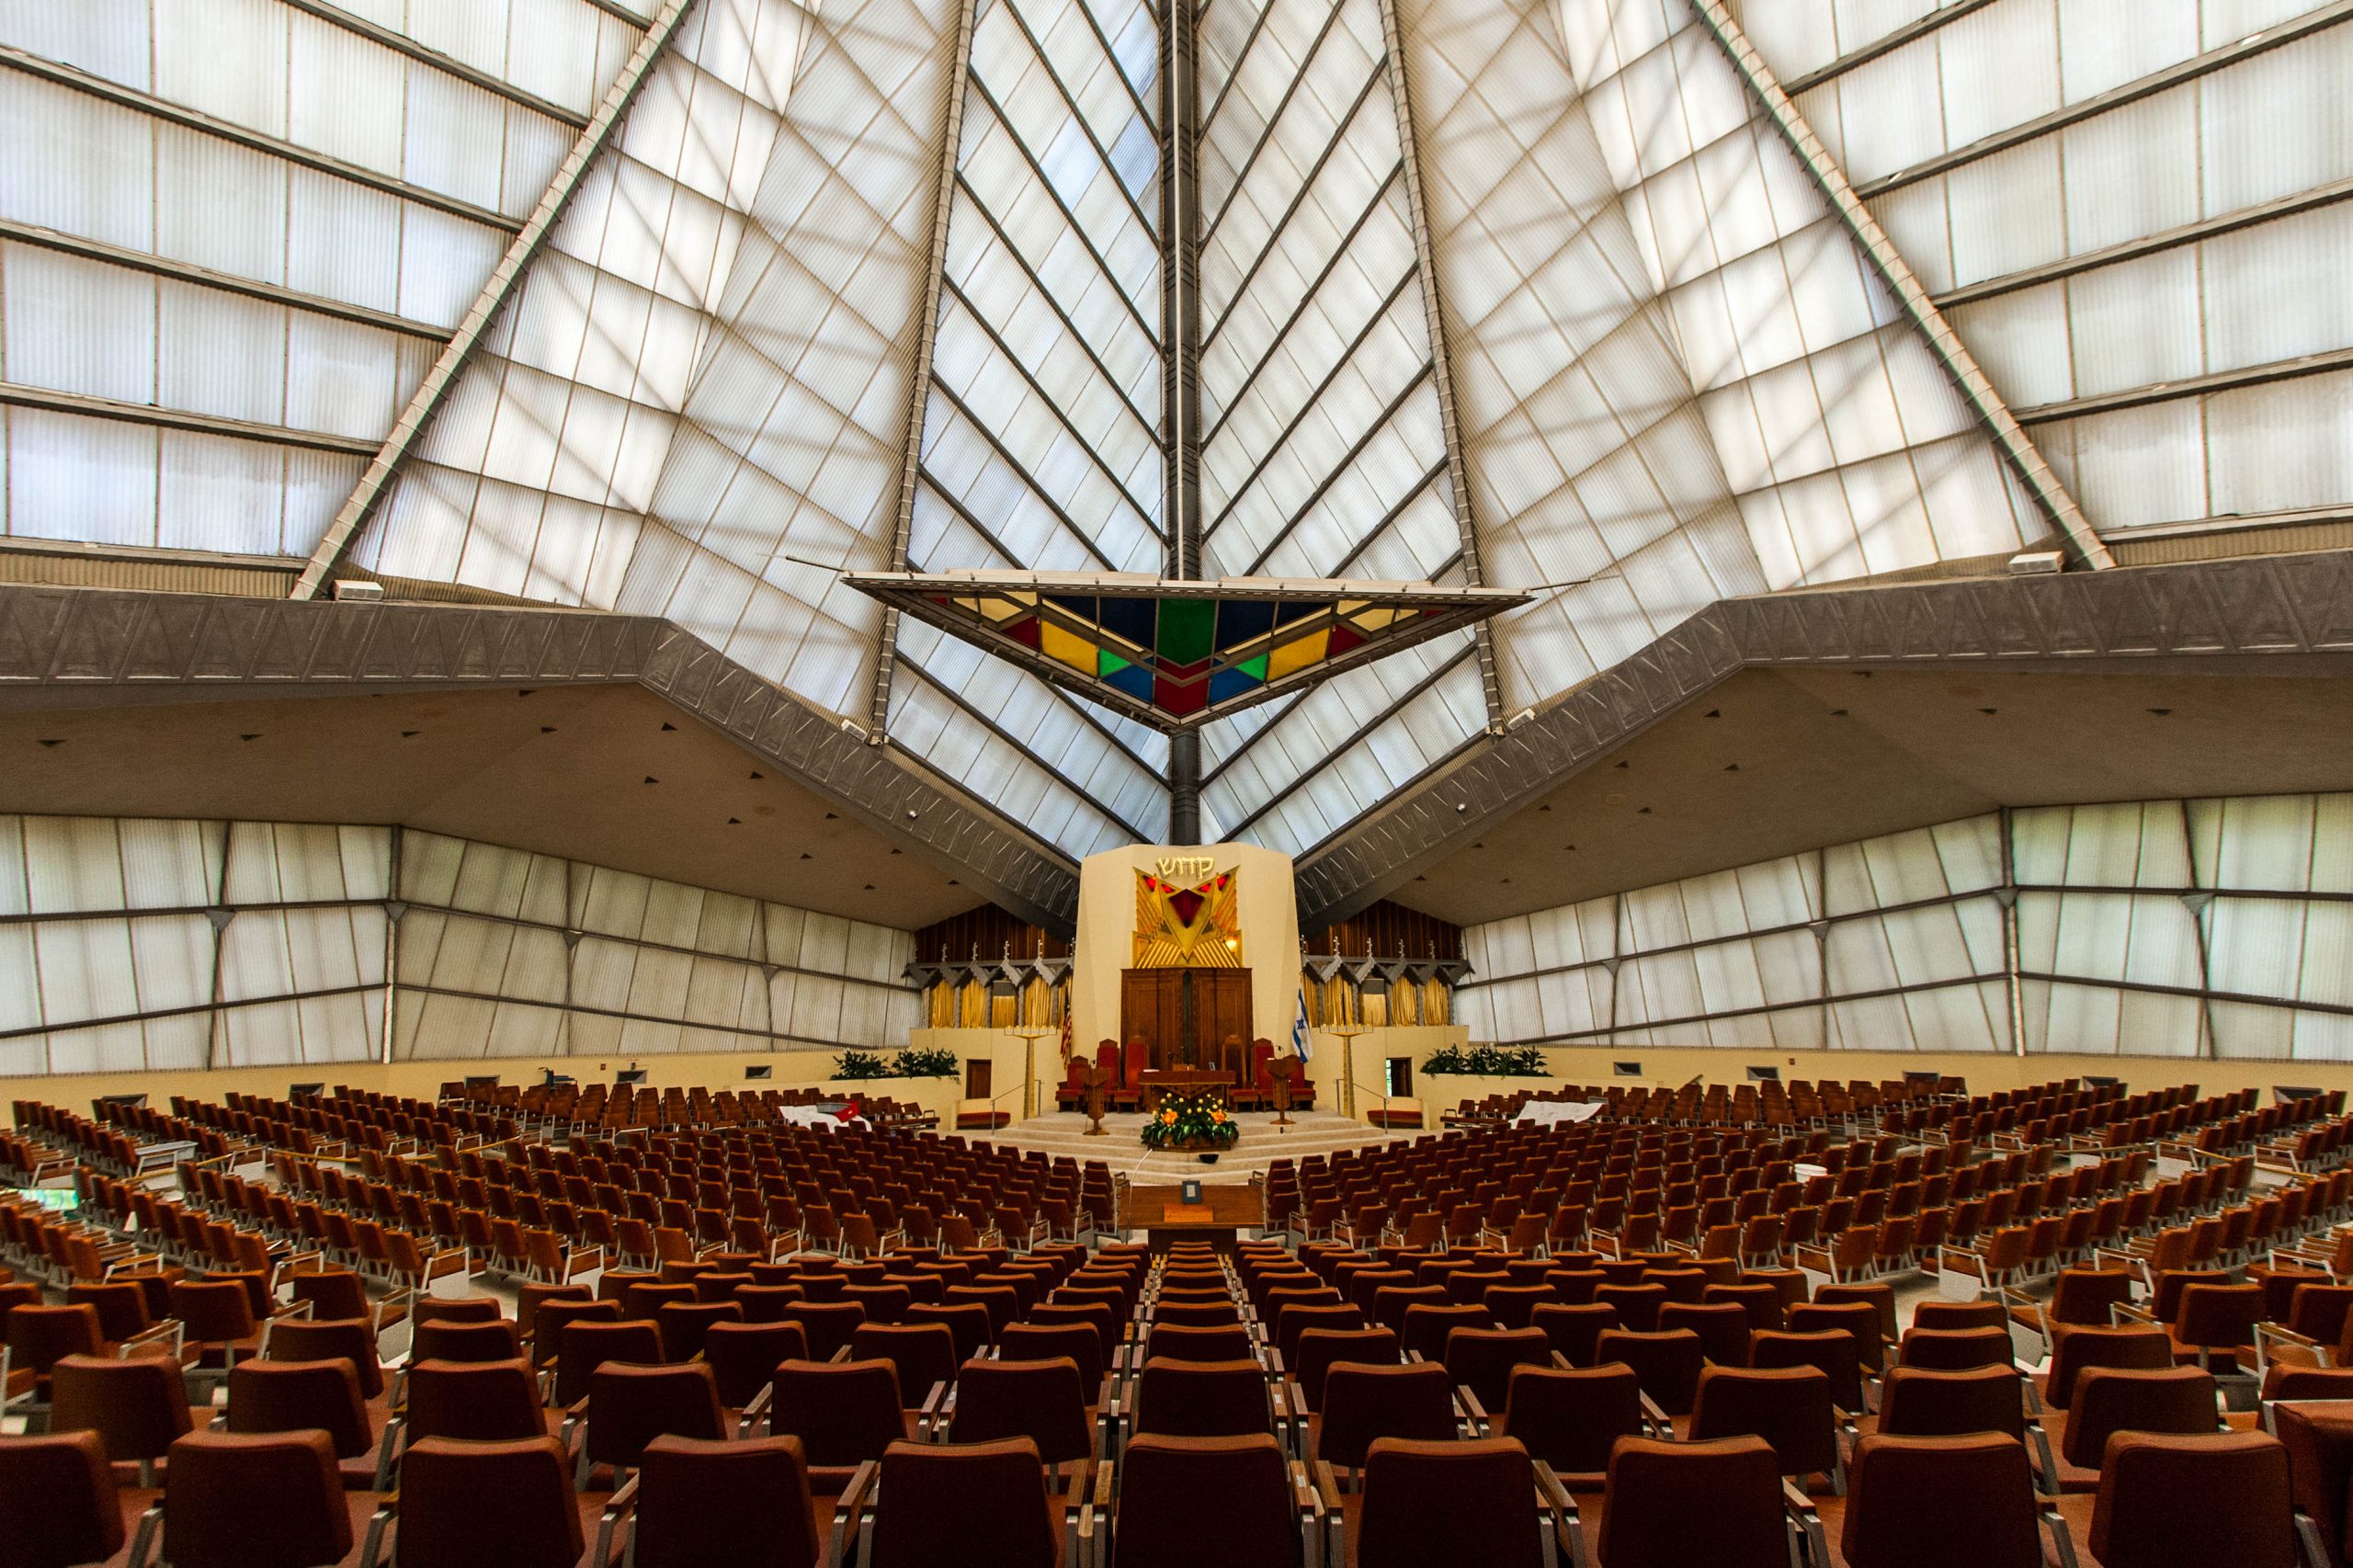 Photo of the Interior of the Beth Sholom Synagogue in Elkins Park, Pennsylvania with a very high, white windowed ceiling and colorful stained glass at the front